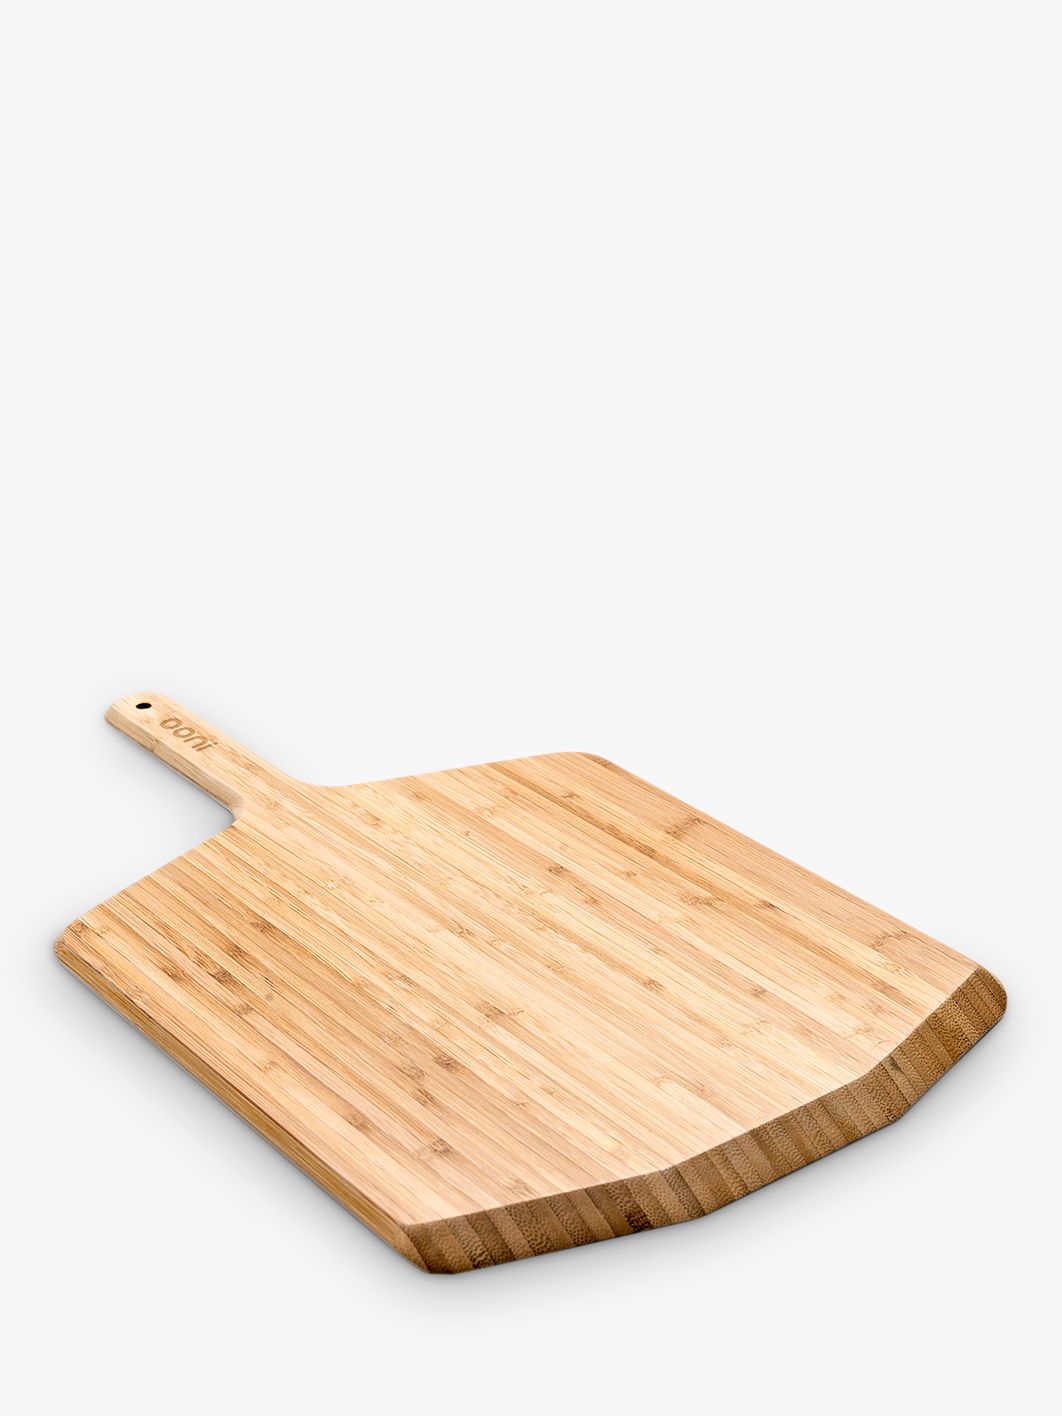 Choice 18 x 18 Wooden Tapered Pizza Peel with 24 Handle